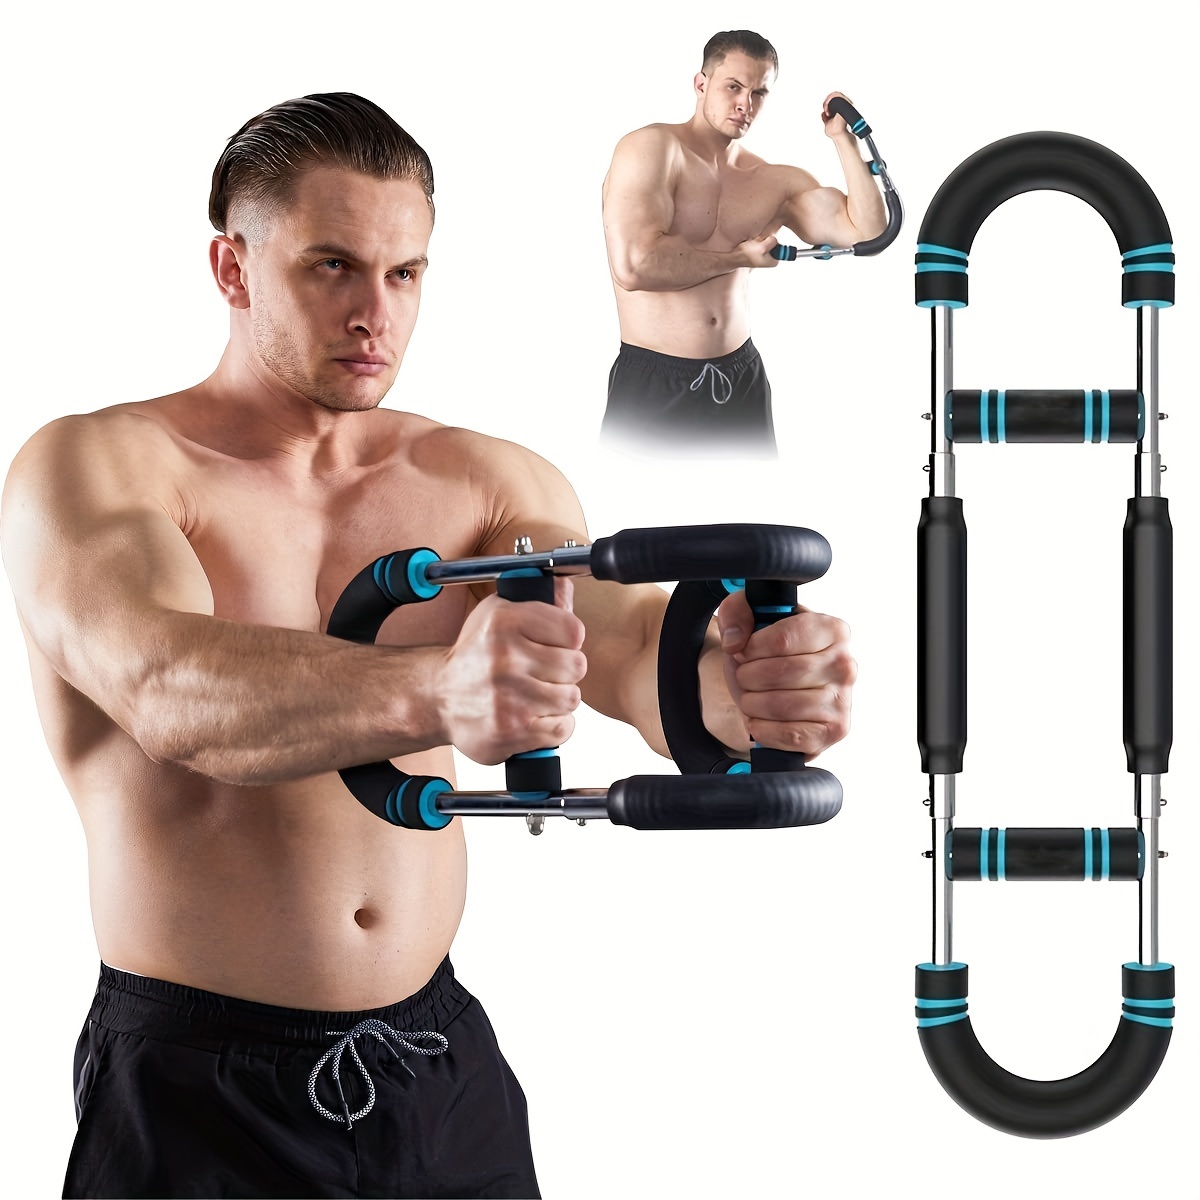  UB TONER - Portable Arm Workout Equipment - Great for Work from  Home & Travel Arm Exercises - Arm Resistance Workout Helps To Tone Arms,  Chest and Strengthens Posture : Sports & Outdoors